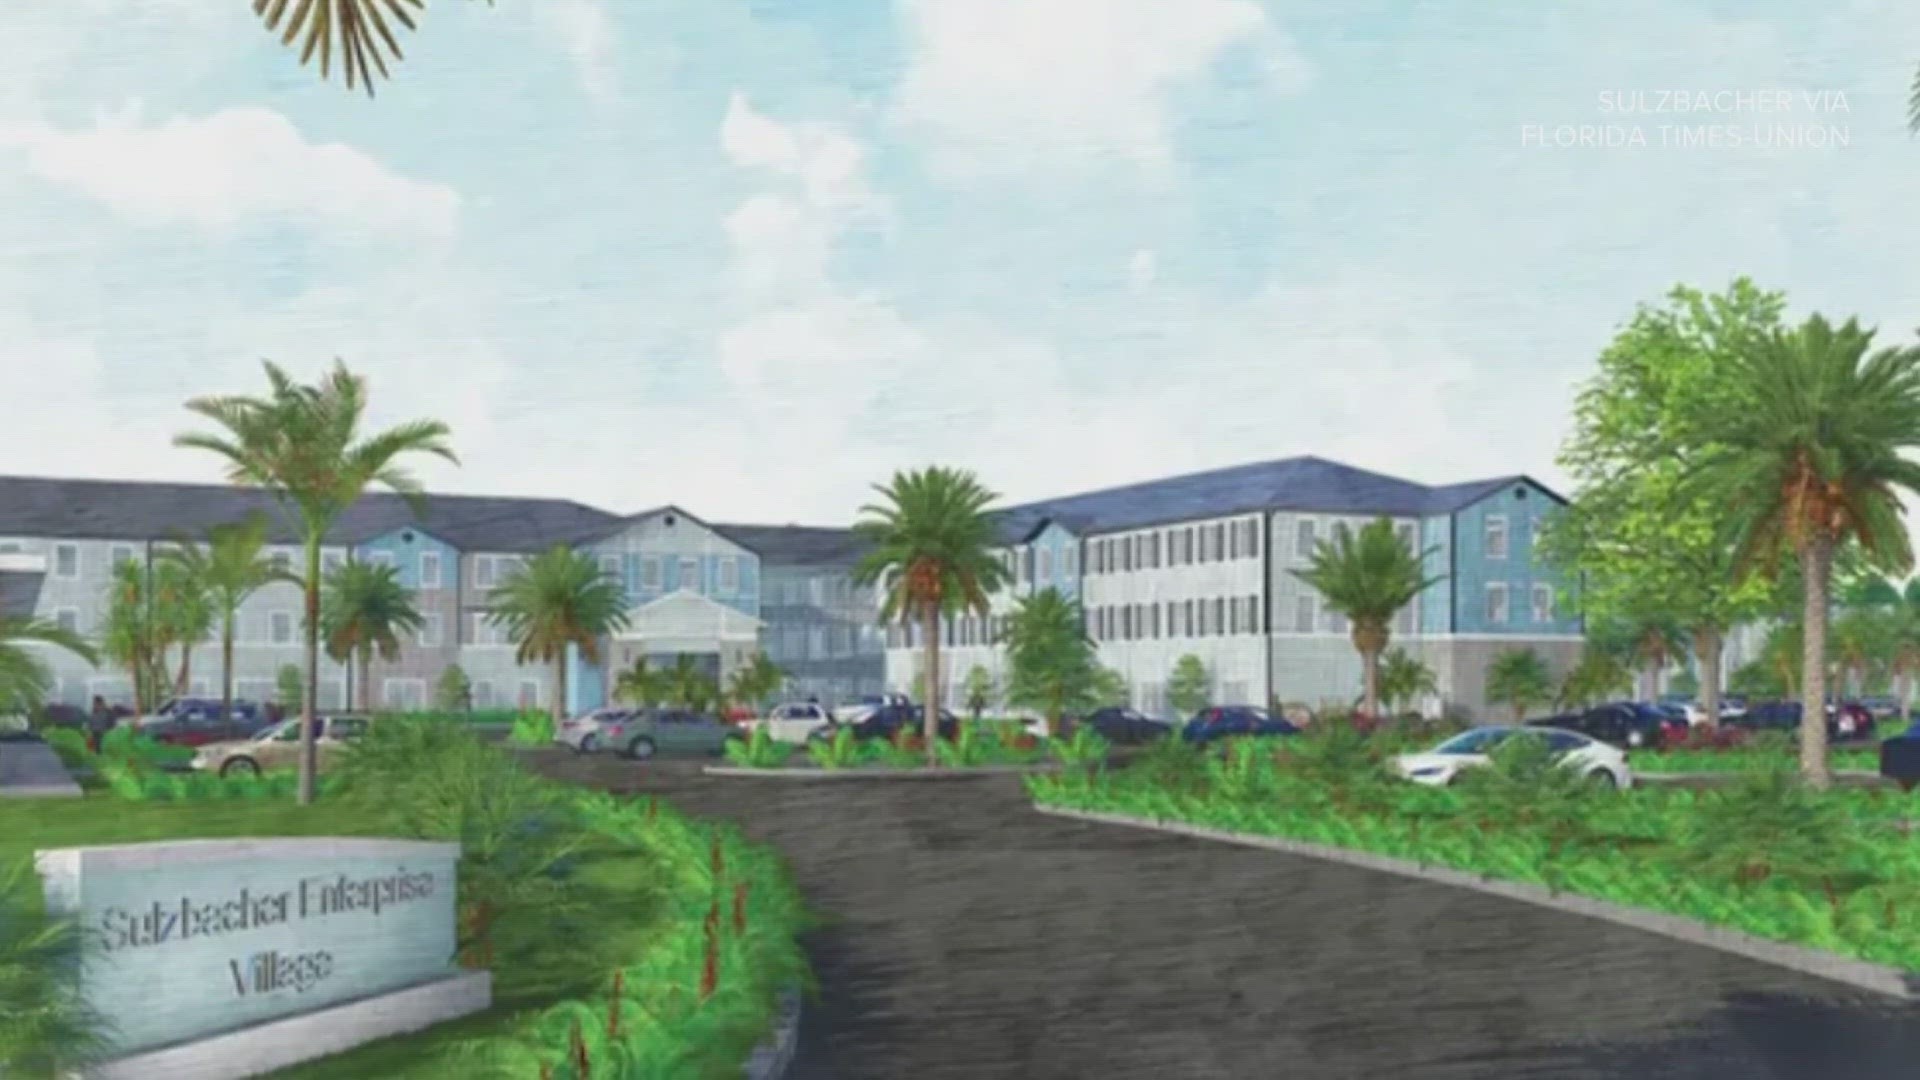 Mayo Clinic donated $5 million to Sulzbacher for the creation of a community health clinic at the new Enterprise Village.